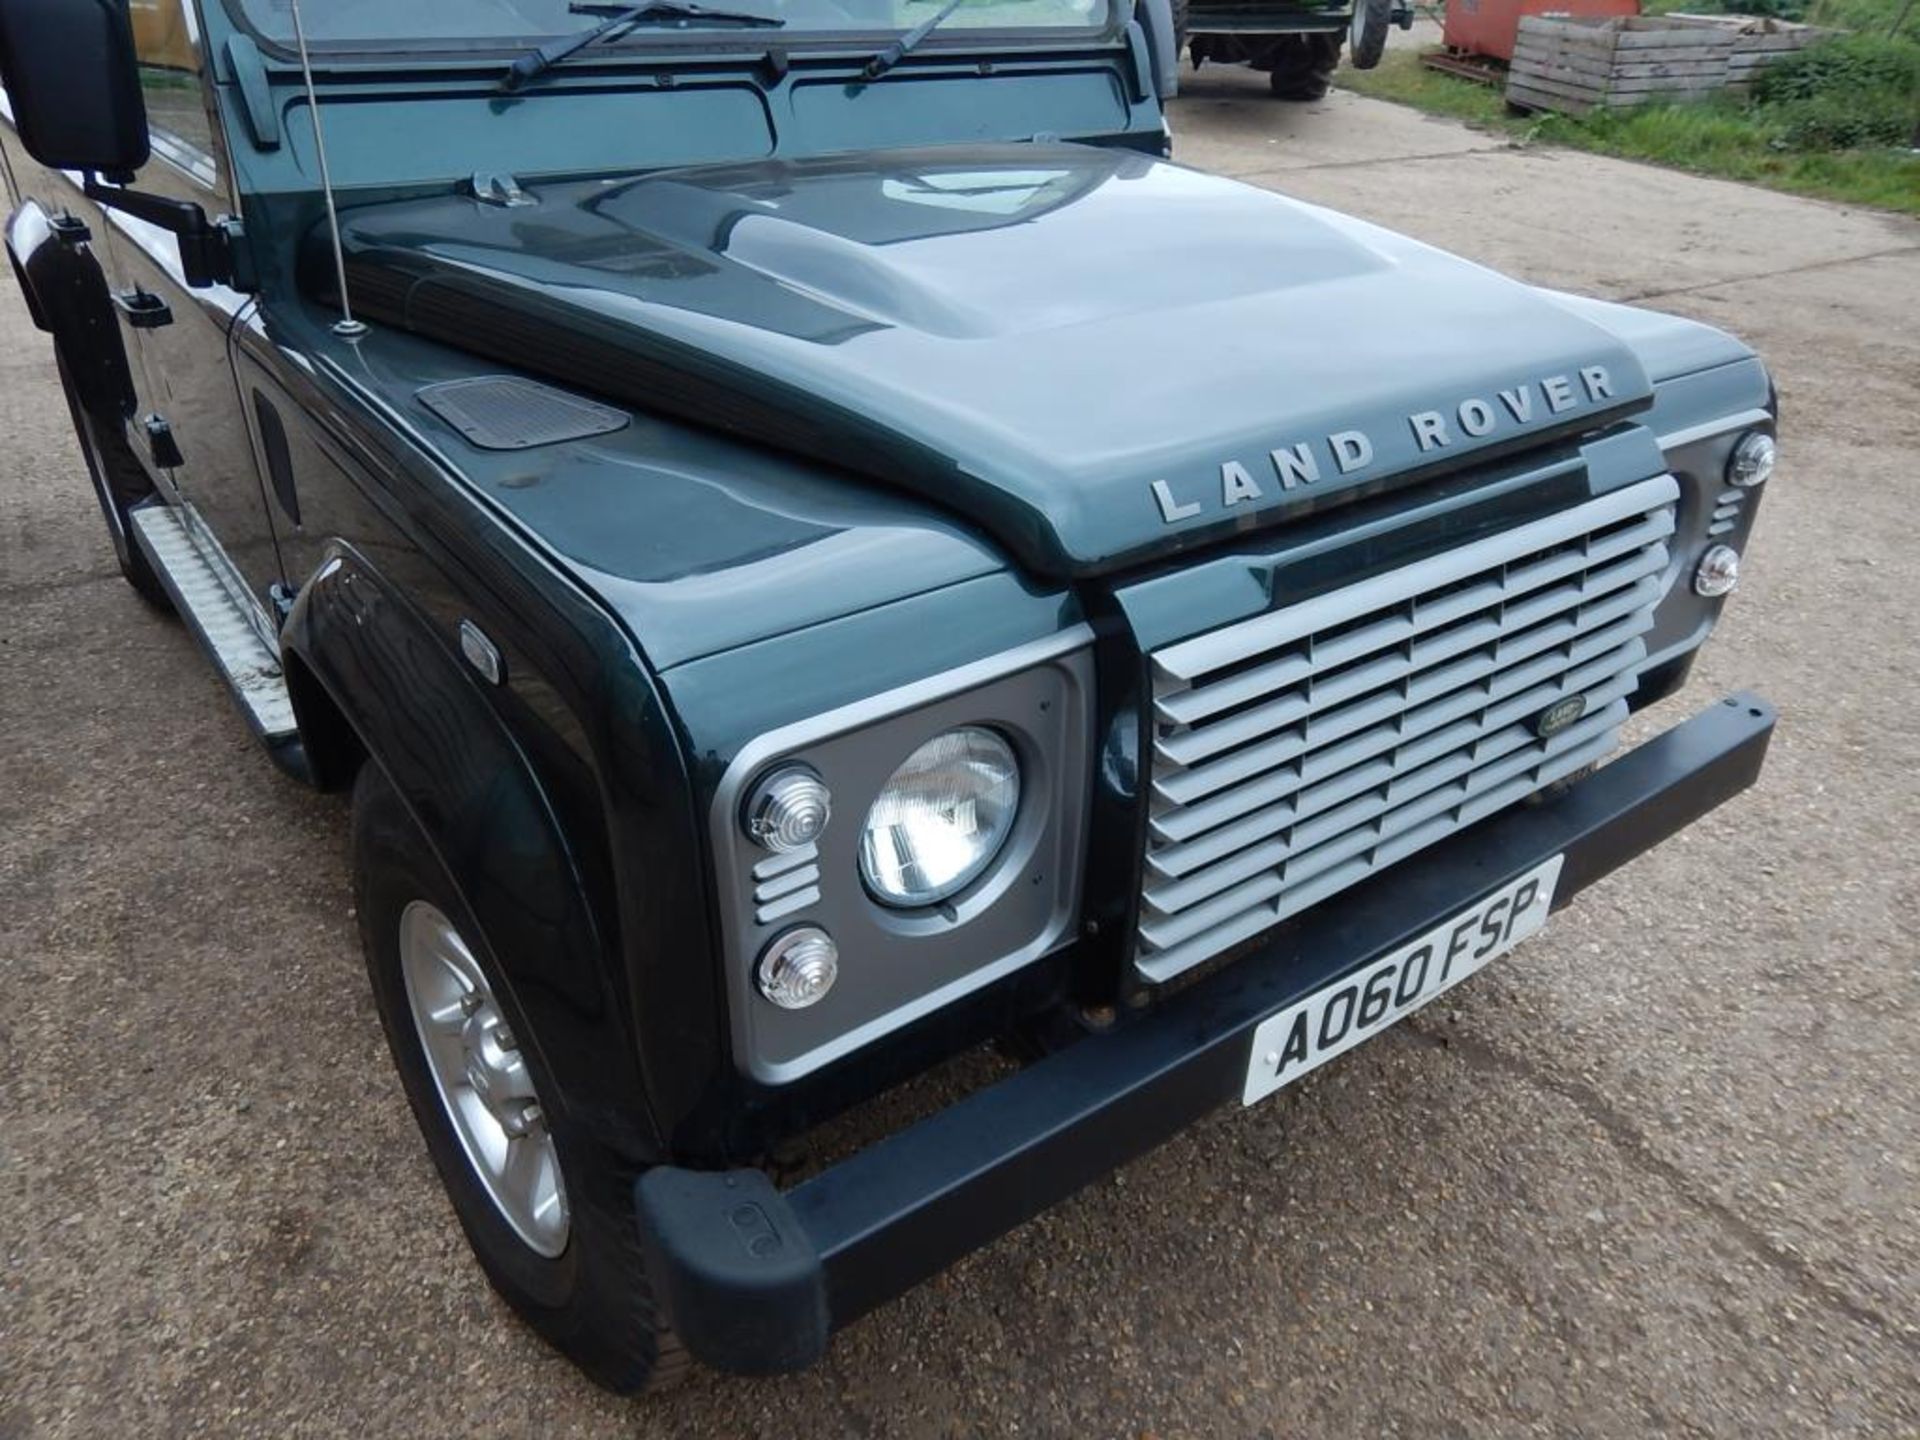 Land Rover Defender 110 XS 2.4L TDCi manual twin cab with half leather seats, air conditioning, - Image 5 of 8